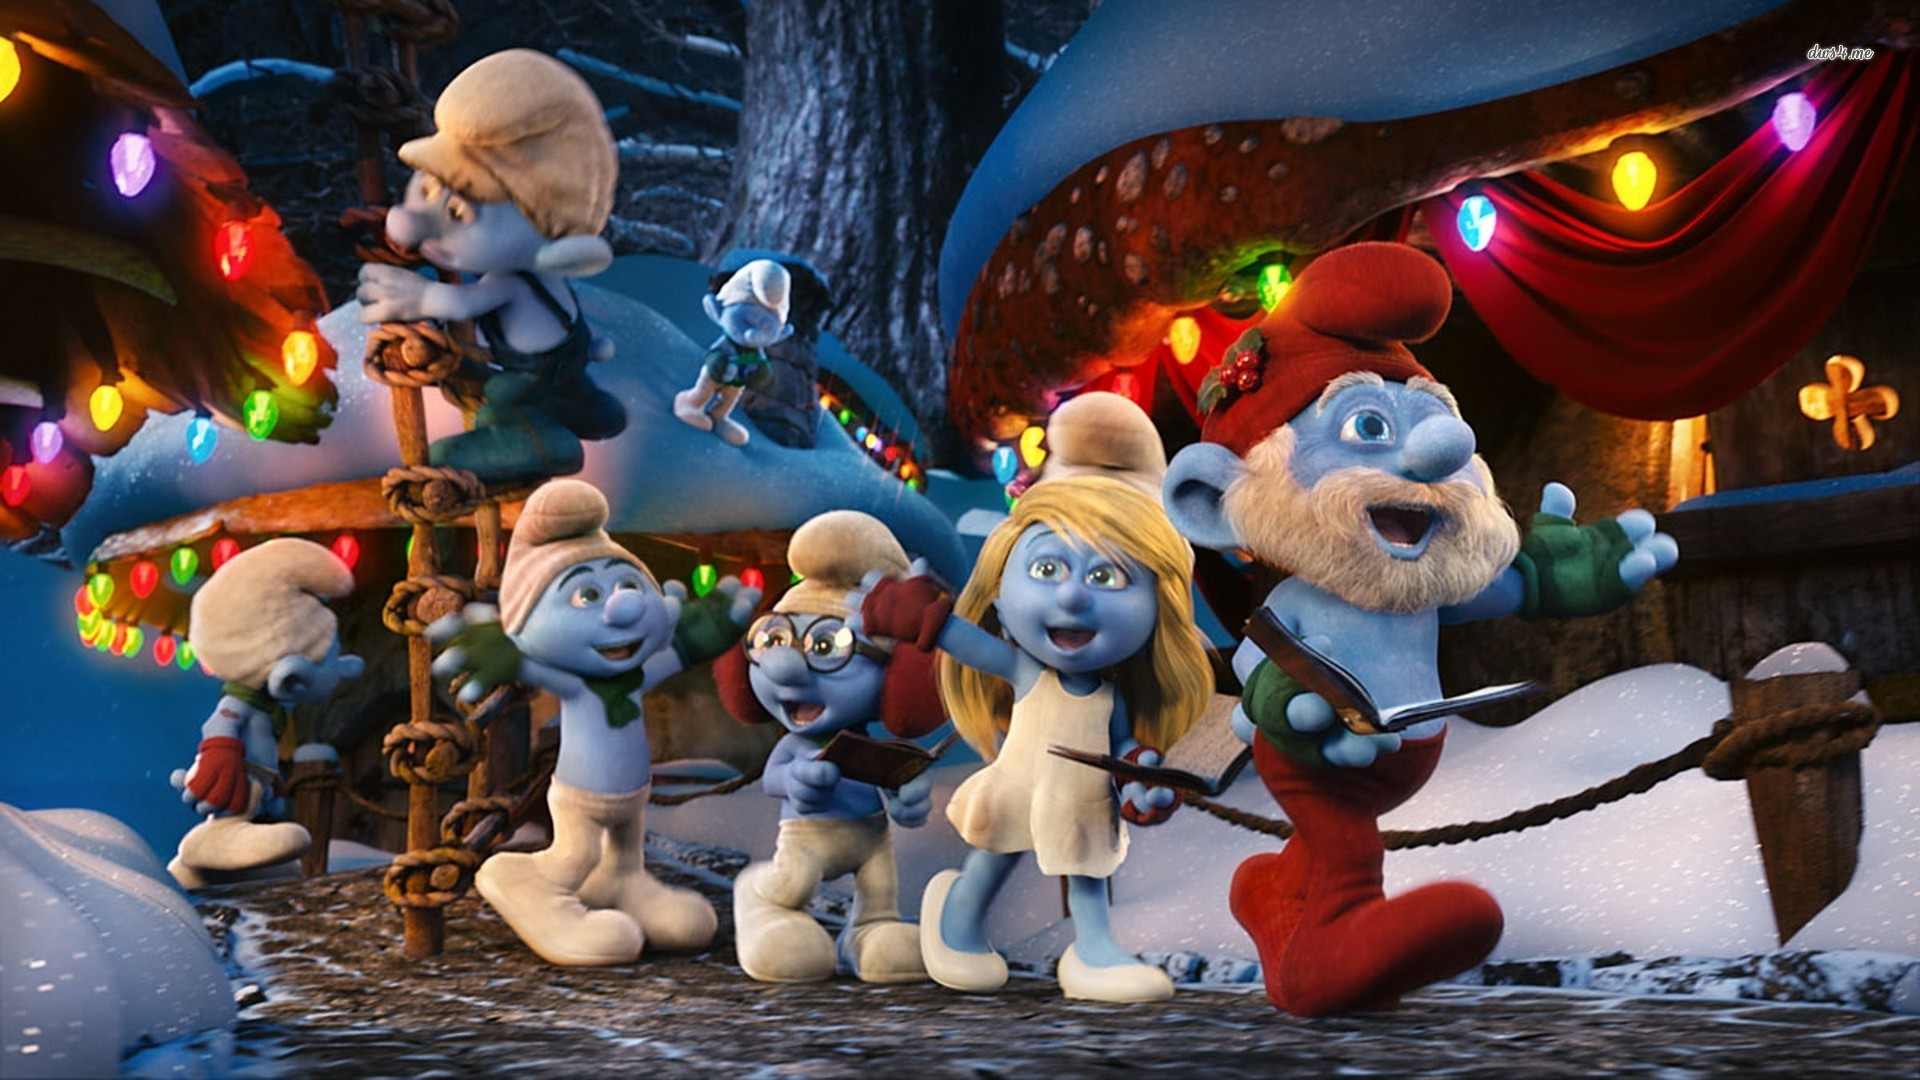 1920x1080 10+ The Smurfs HD Wallpapers and Backgrounds